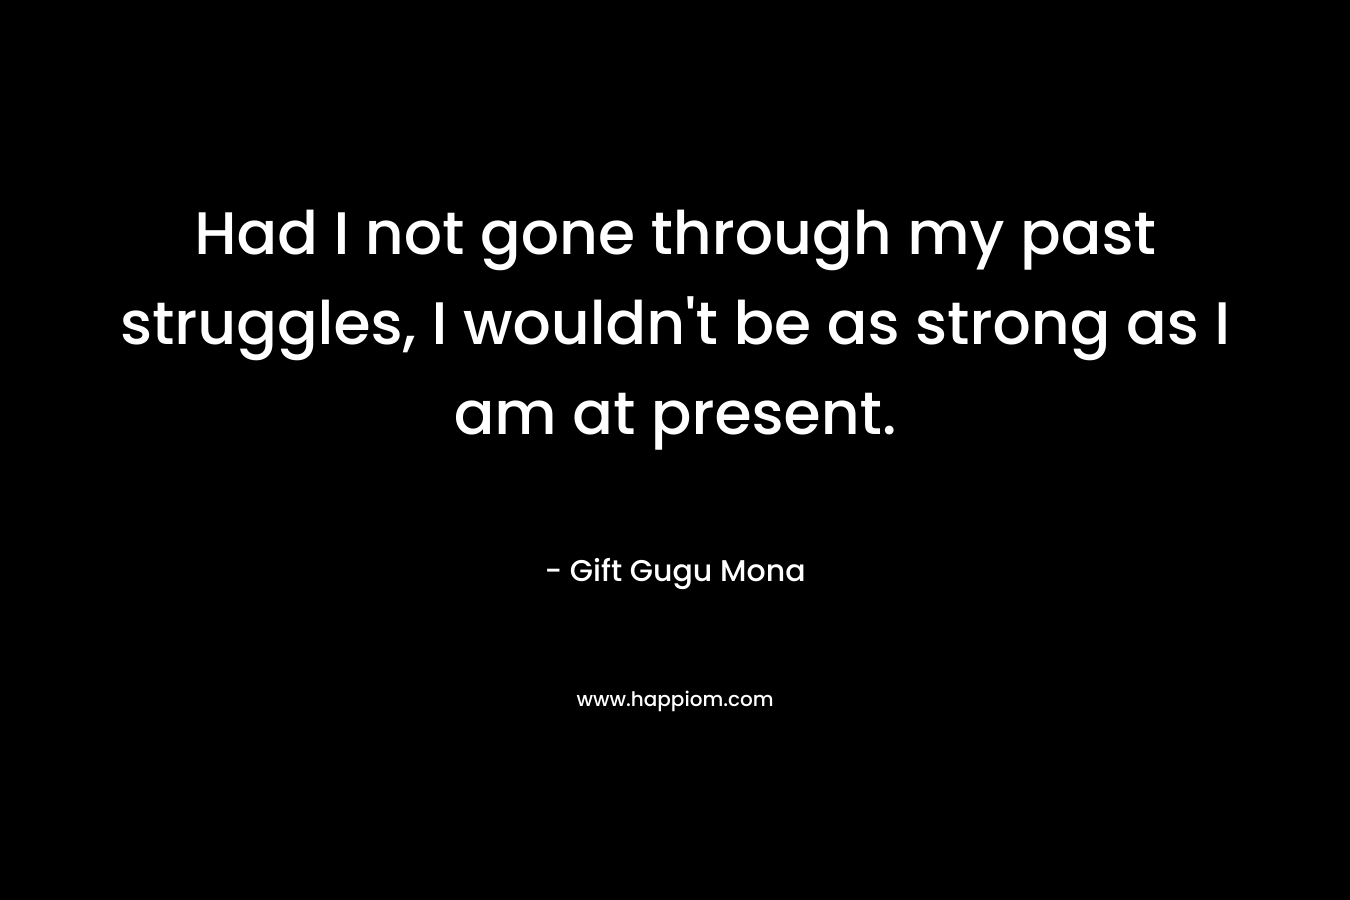 Had I not gone through my past struggles, I wouldn’t be as strong as I am at present. – Gift Gugu Mona